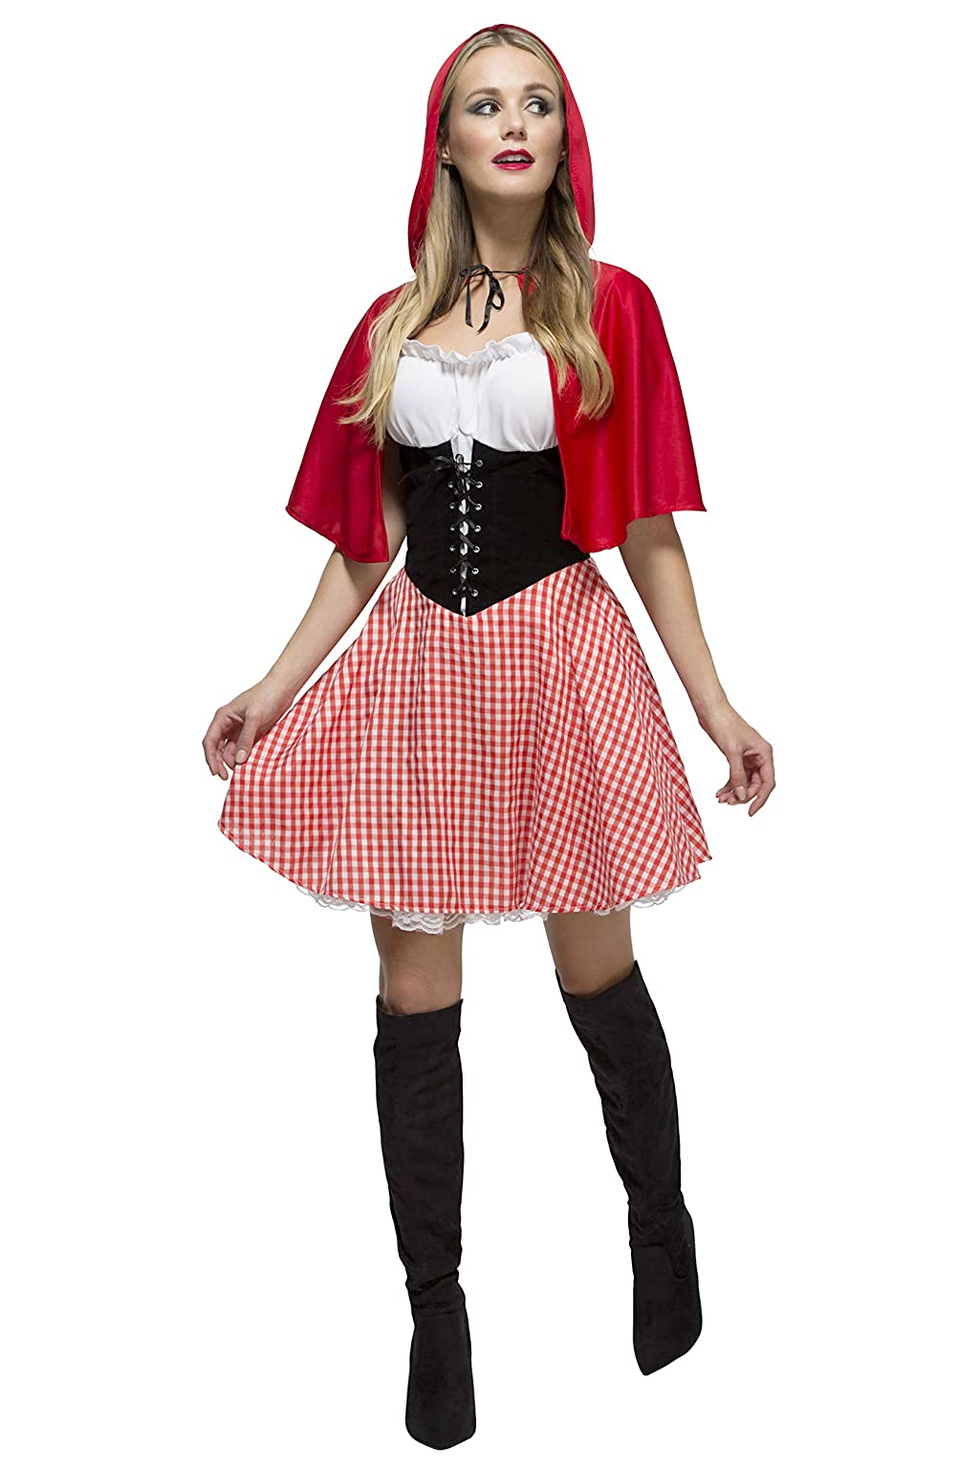 Women's Red Riding Hood Costume, Dress and Hooded Cape